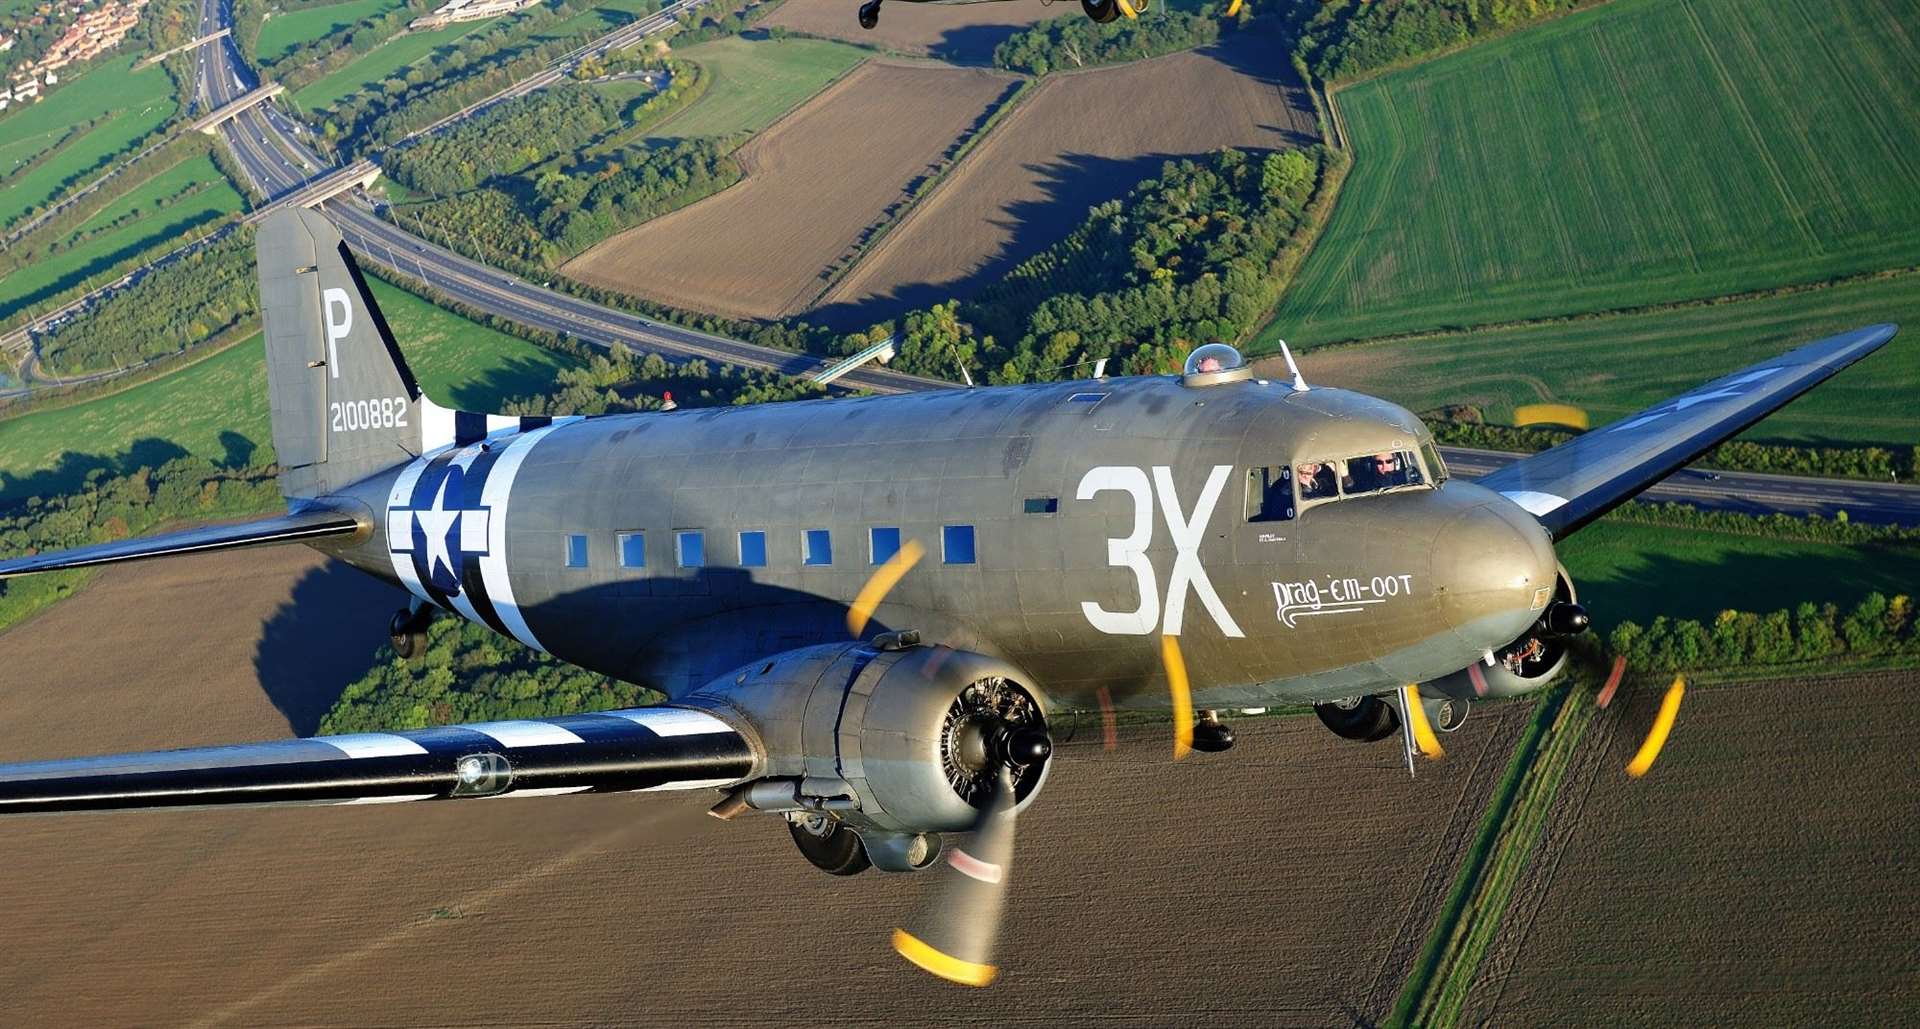 ‘Drag ’em Oot’, a 1944 C-47 Douglas Sky Train that was used by the US Air Force, will also be on display at the show! Richard Paver Photography. (12840954)